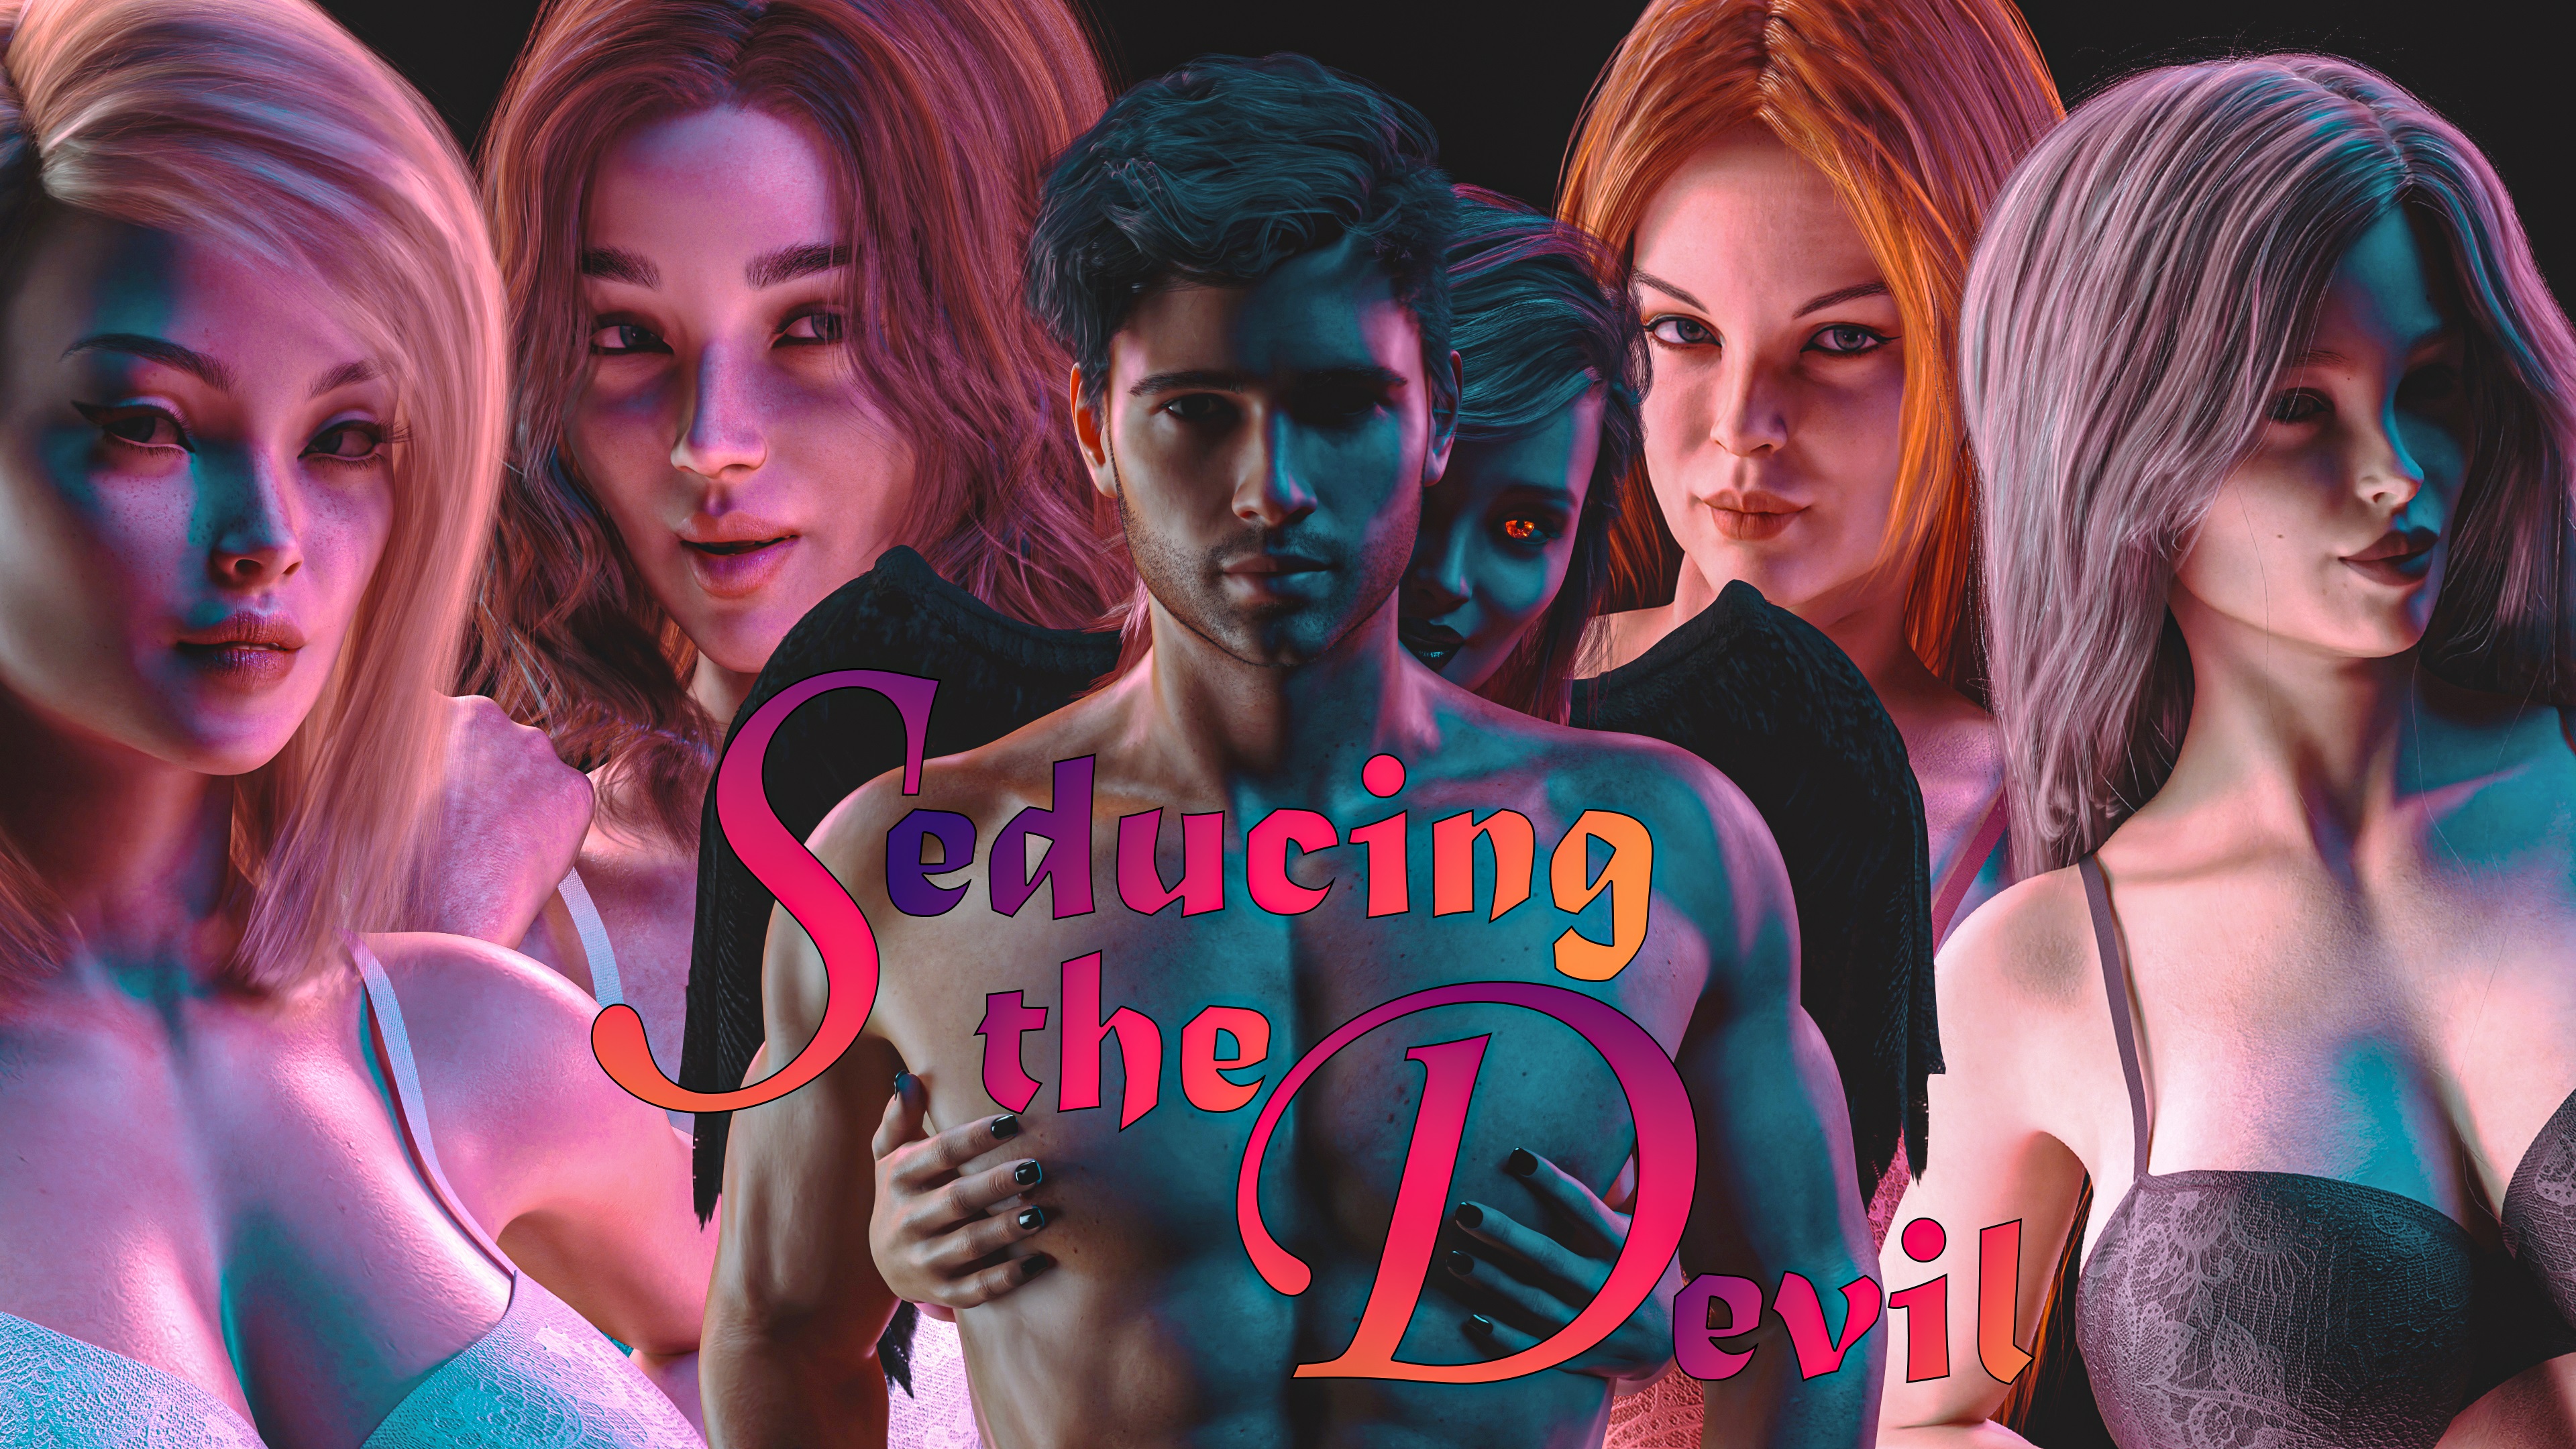 Seducing The Devil by Deafperv by Deafpervs